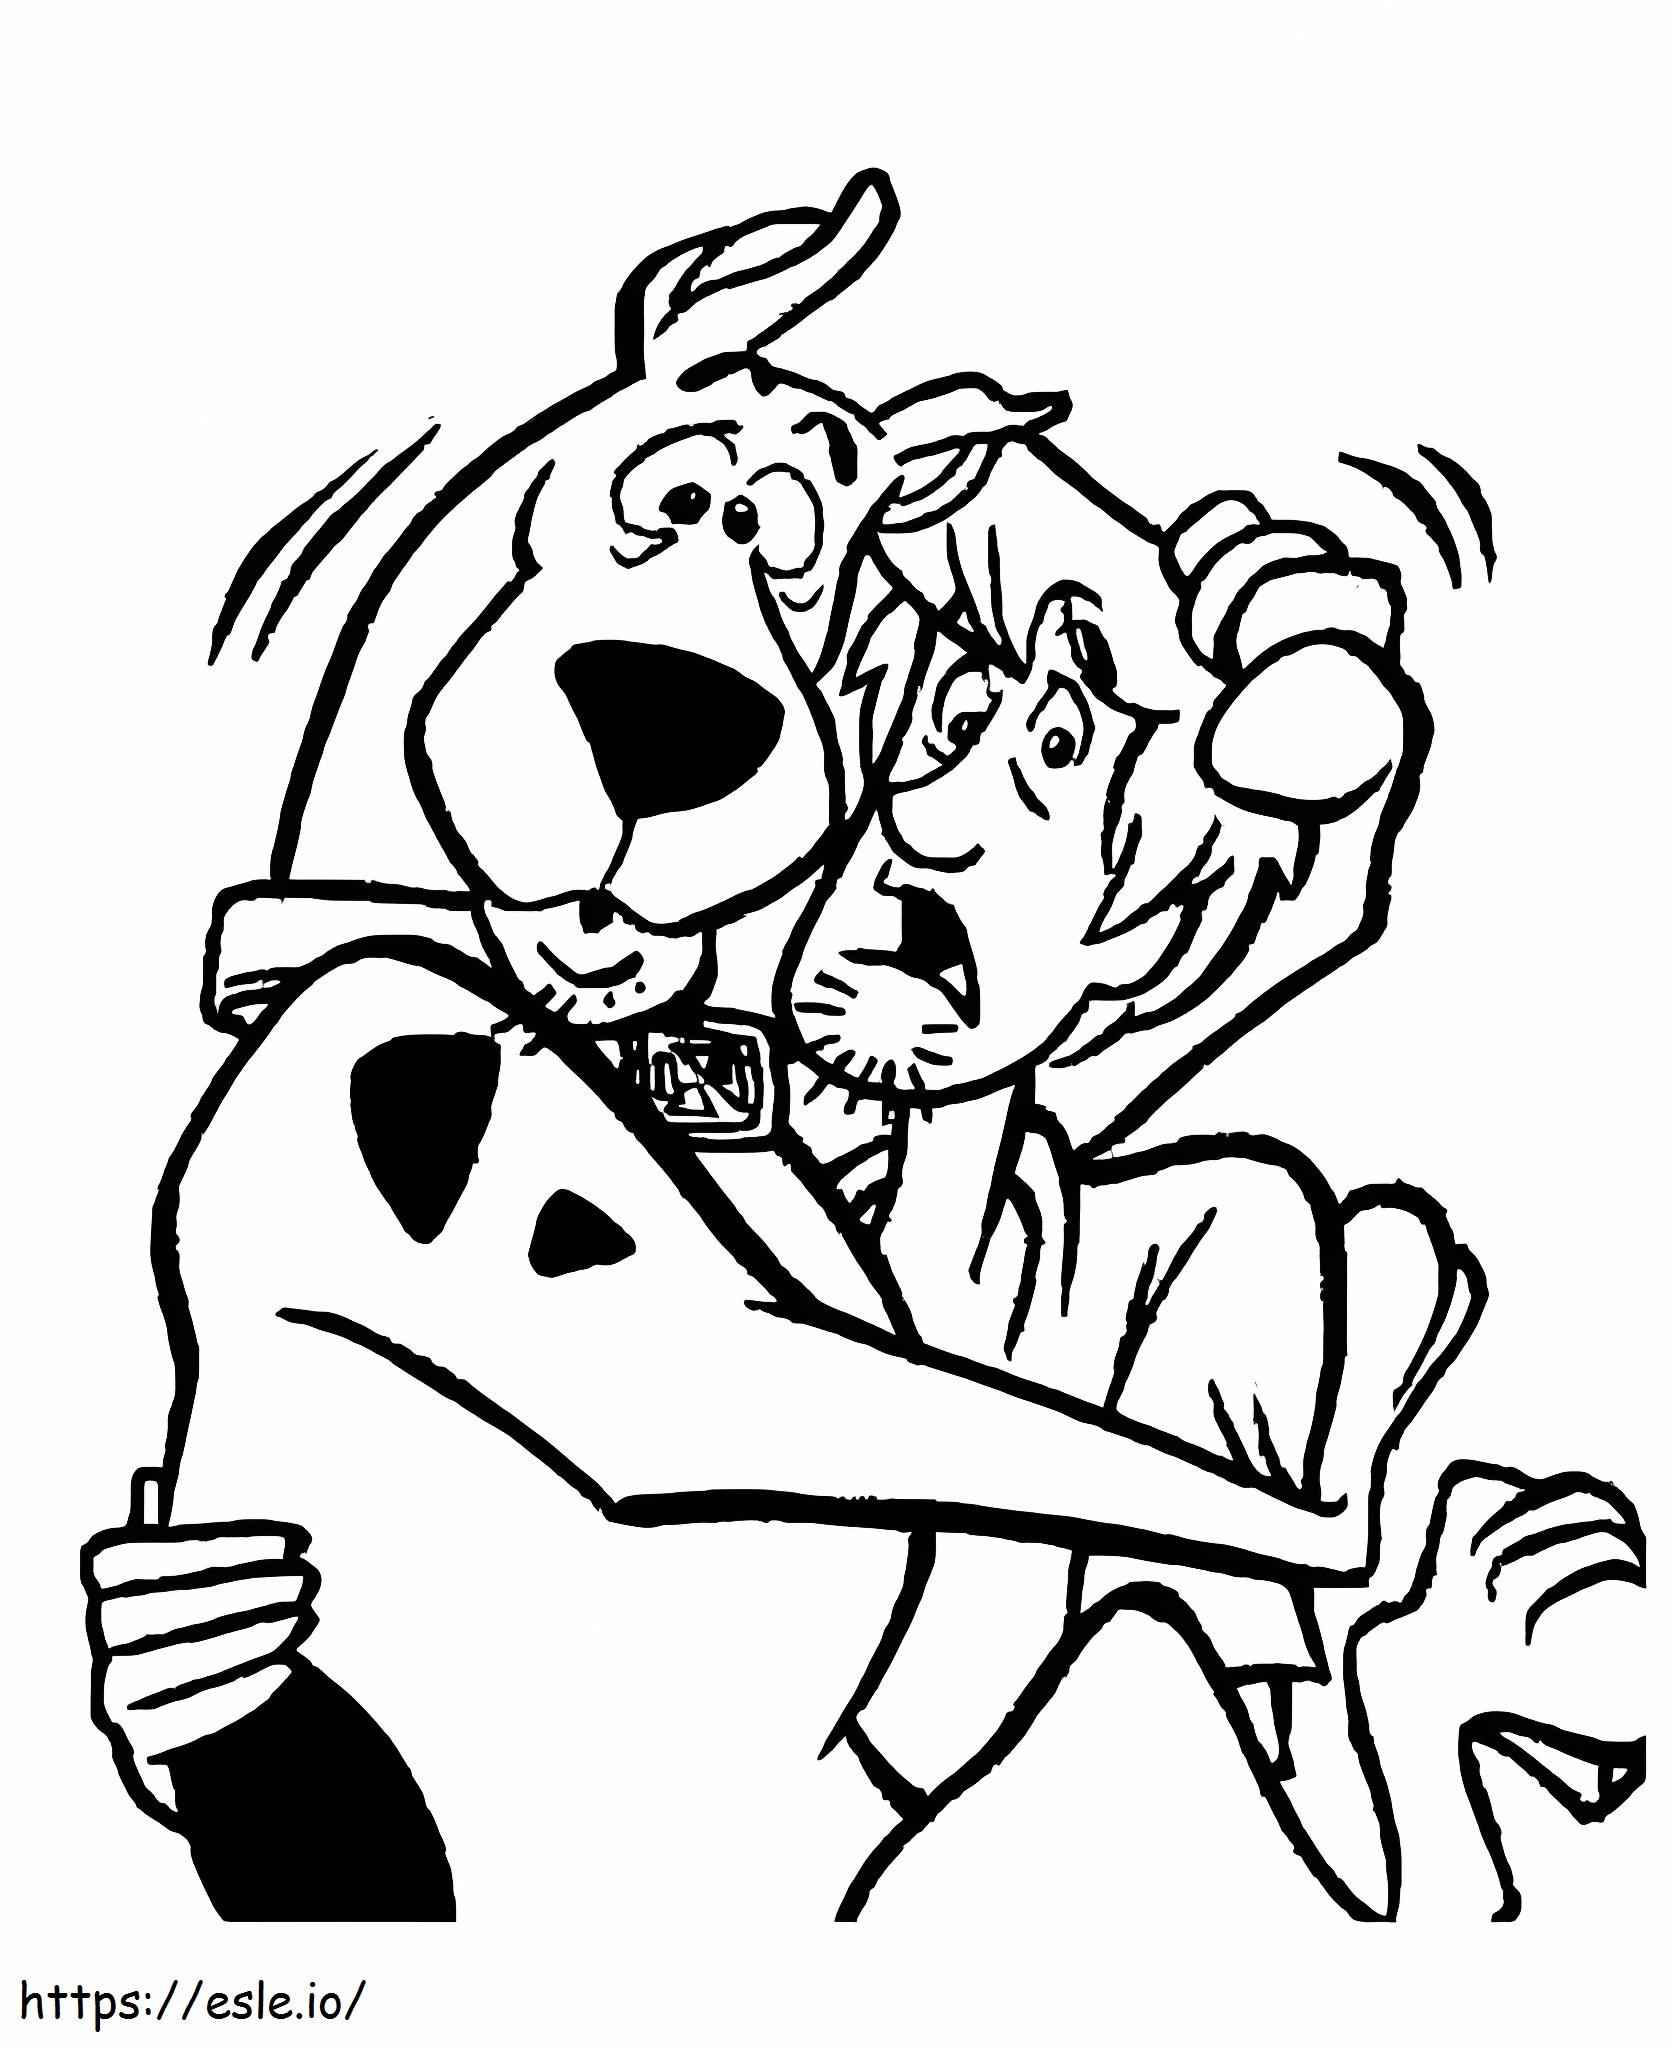 Shaggy Hugging Scooby Doo coloring page